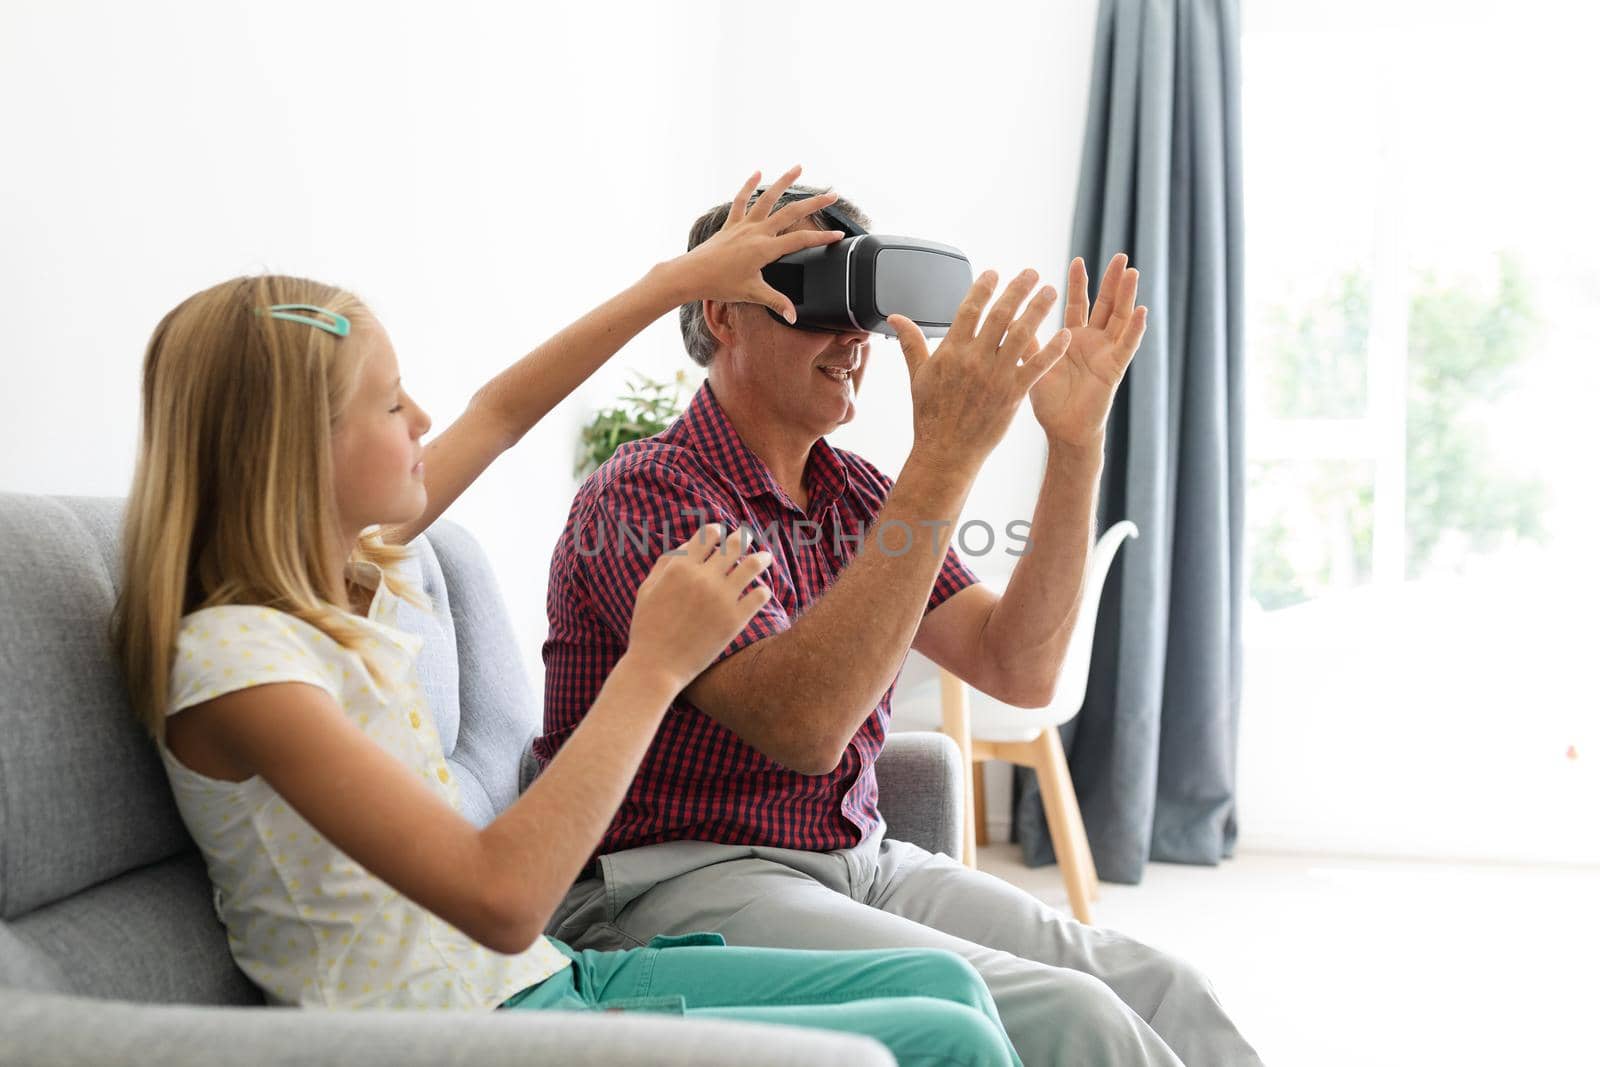 Caucasian granddaughter sitting on couch beside grandfather adjusting his vr headset. happy family spending time together at home.